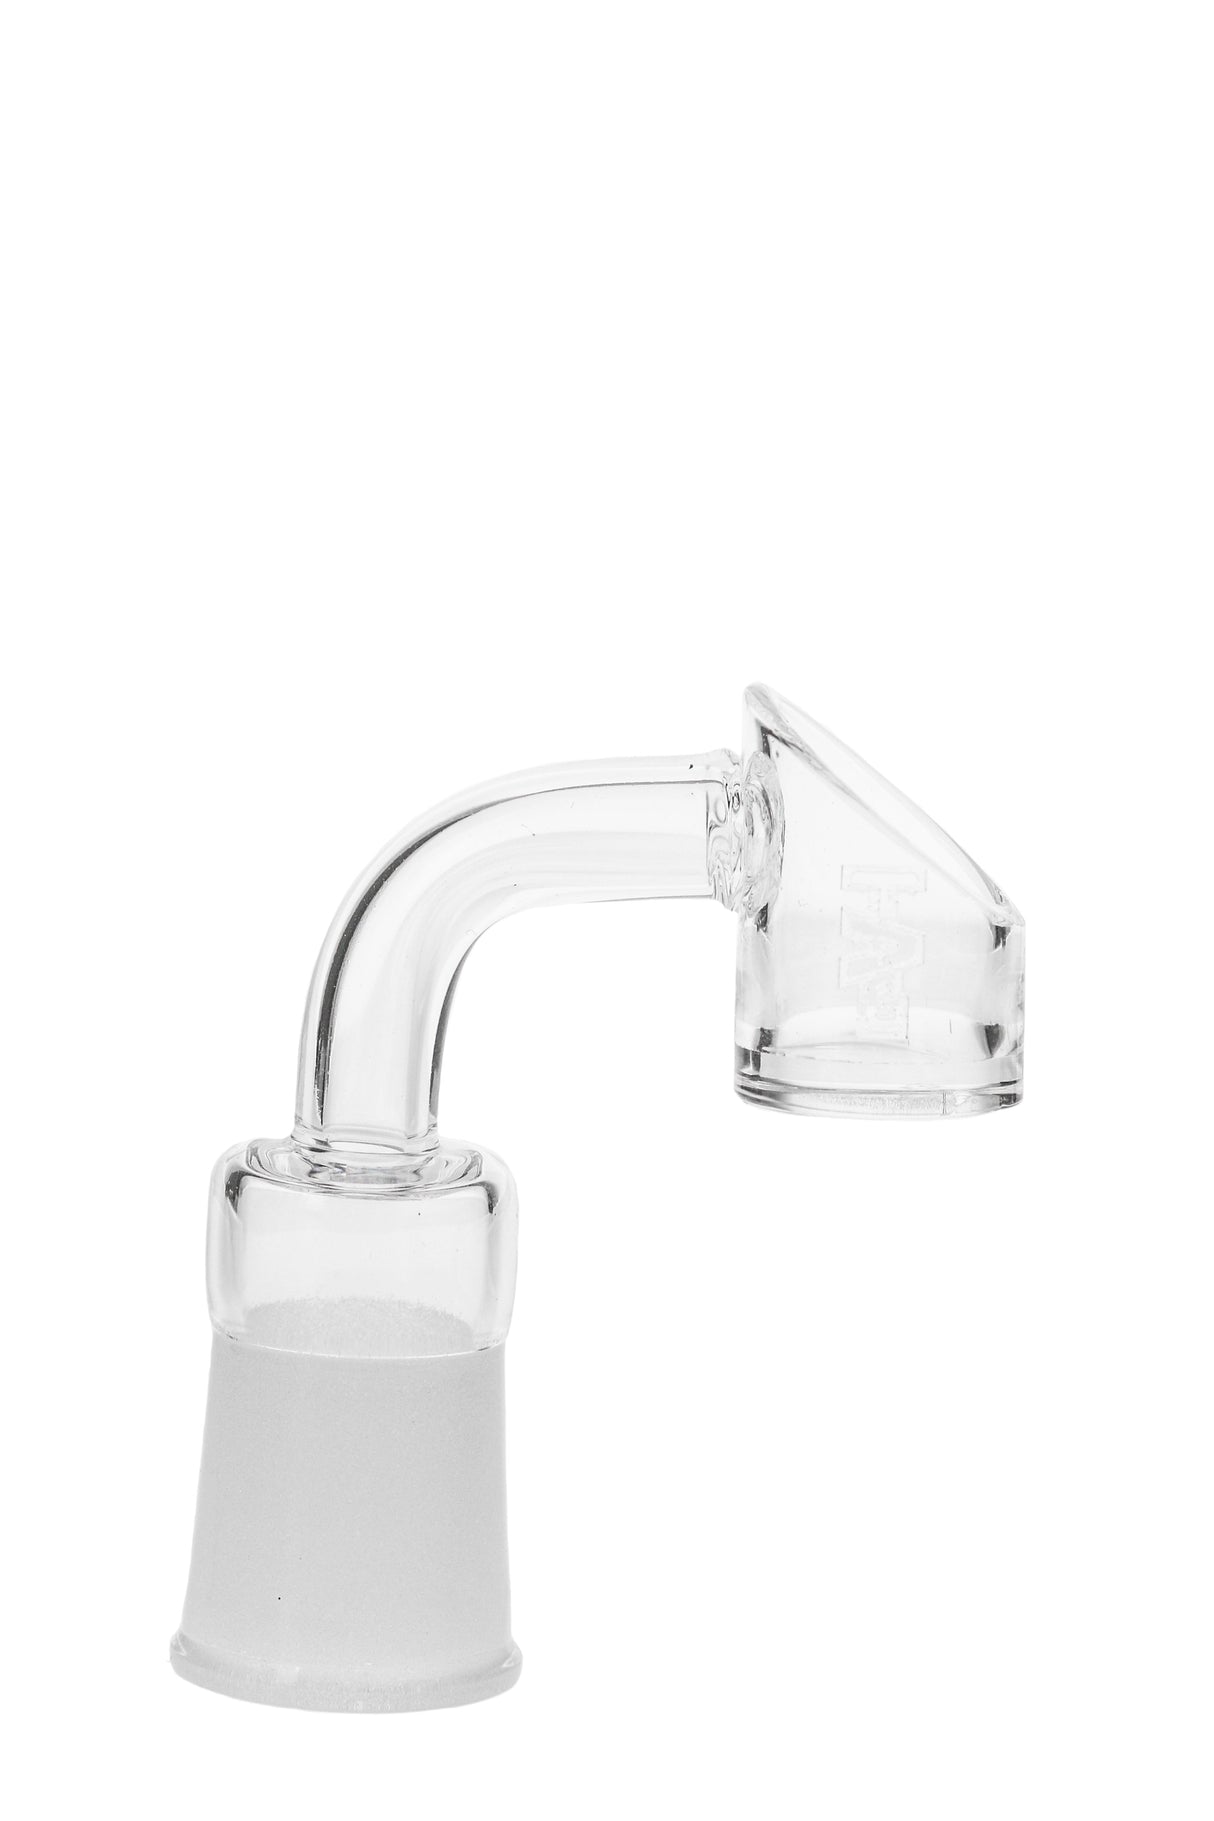 TAG - Quartz Banger with High Air Flow - 14mm Female Joint Side View on White Background